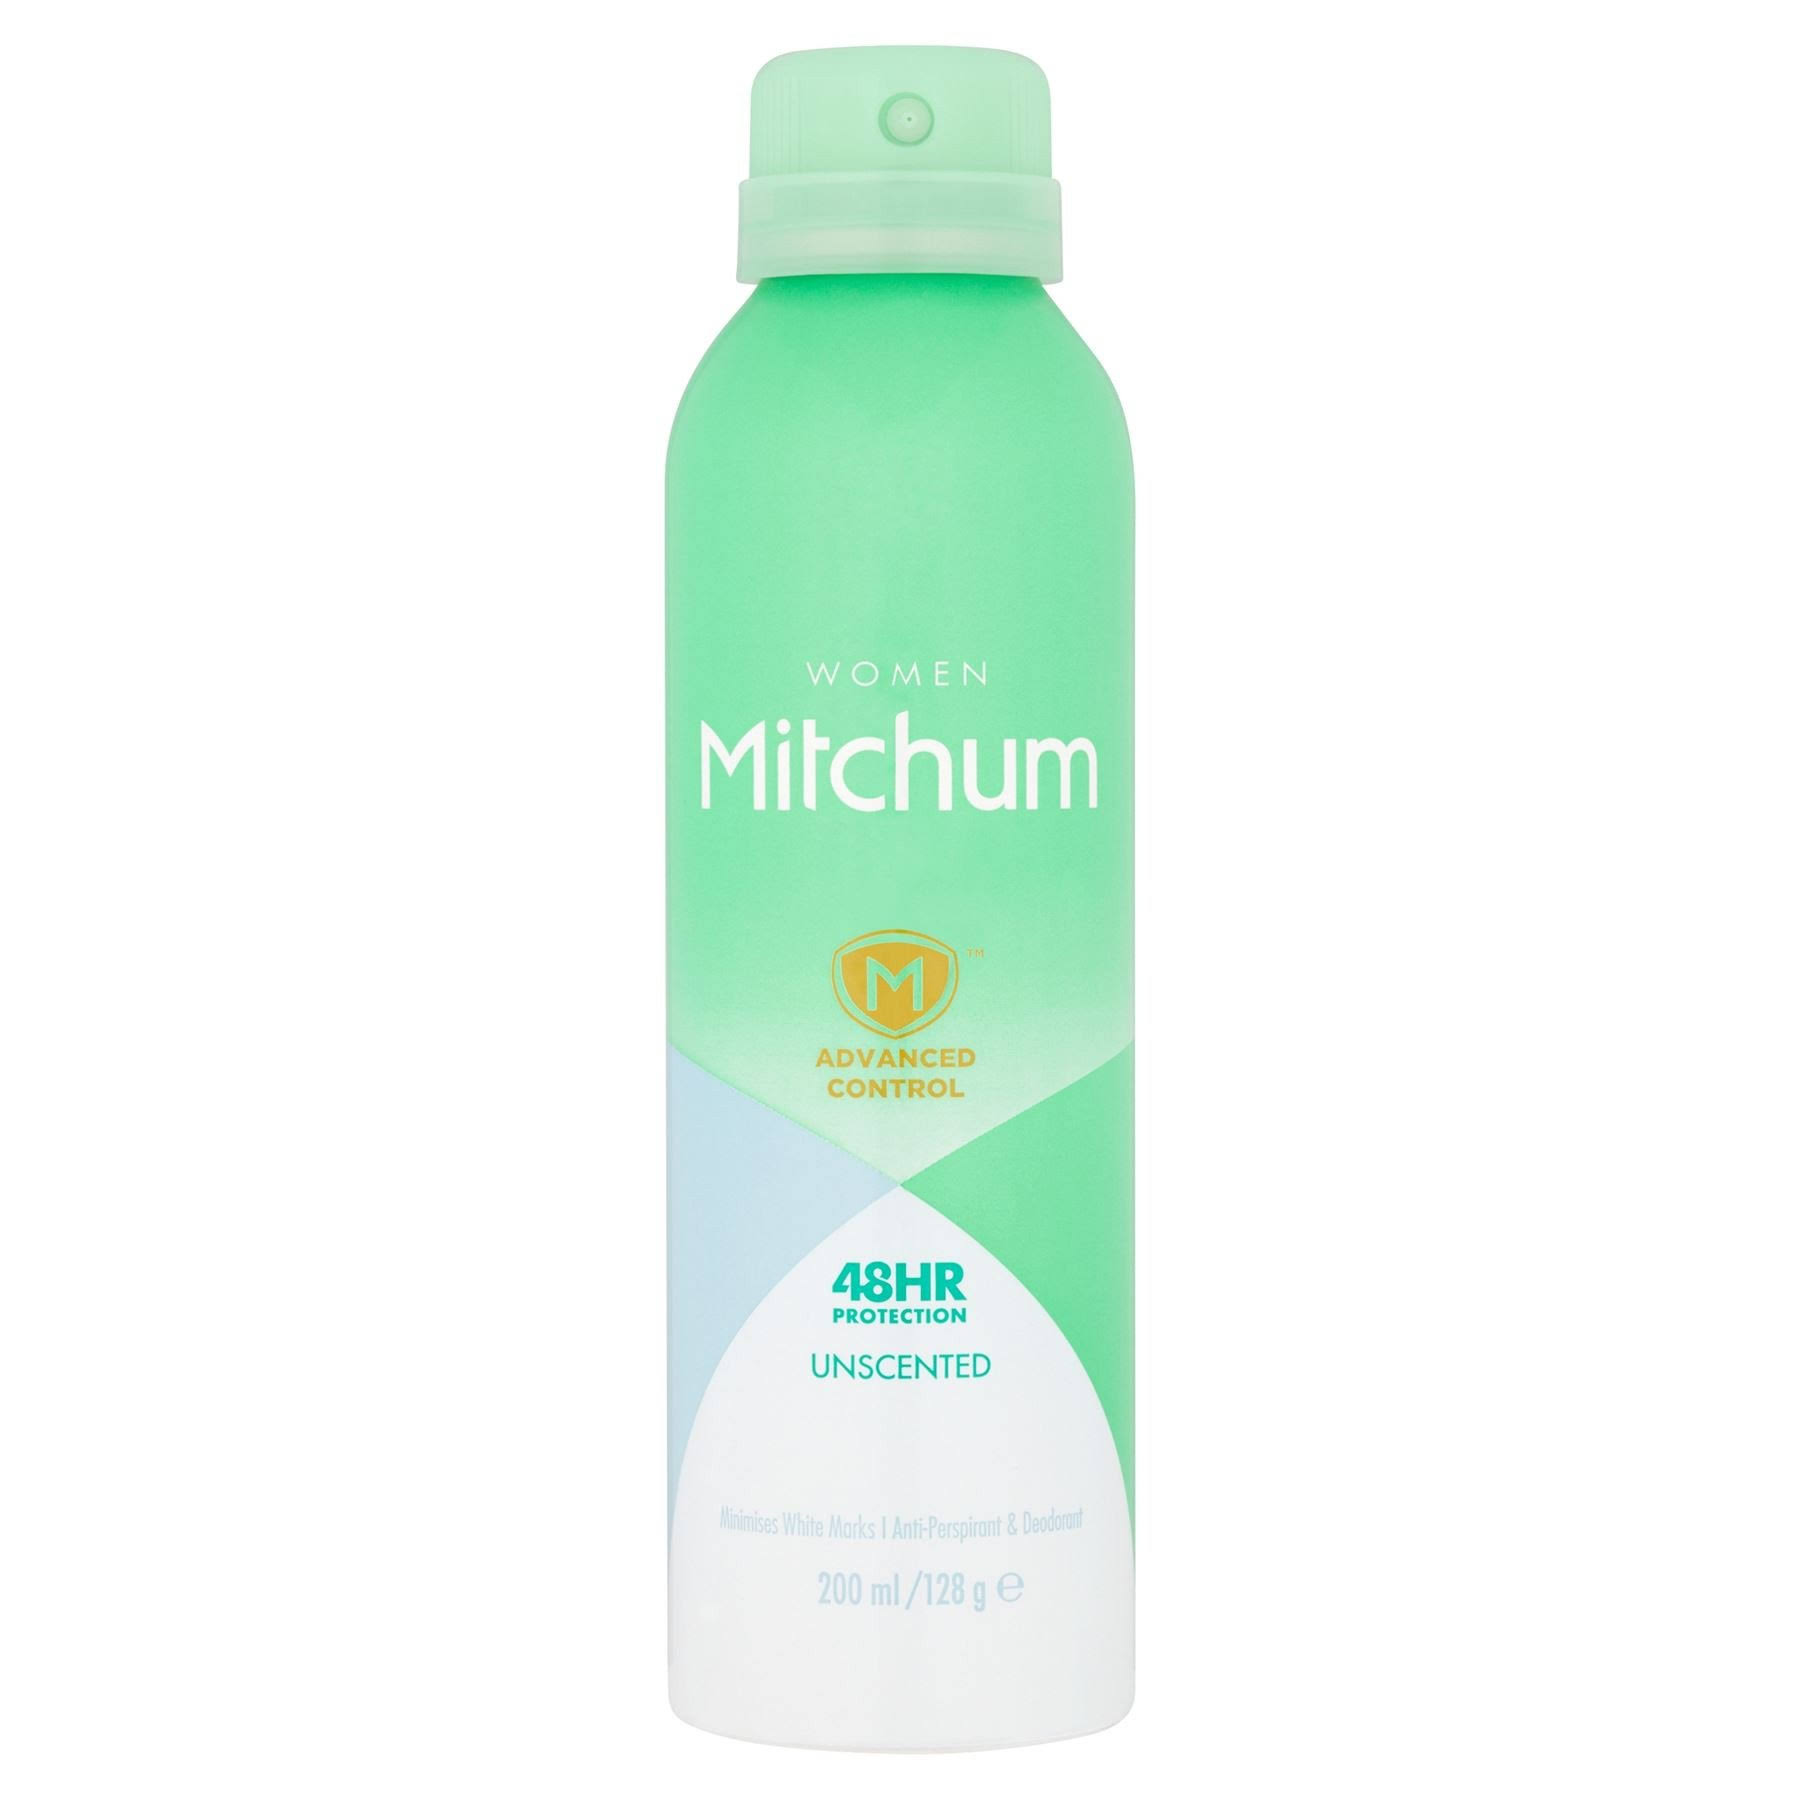 Mitchum Women Triple Odor Defense 48hr Protection Antiperspirant and Deodorant - Unscented, 200ml